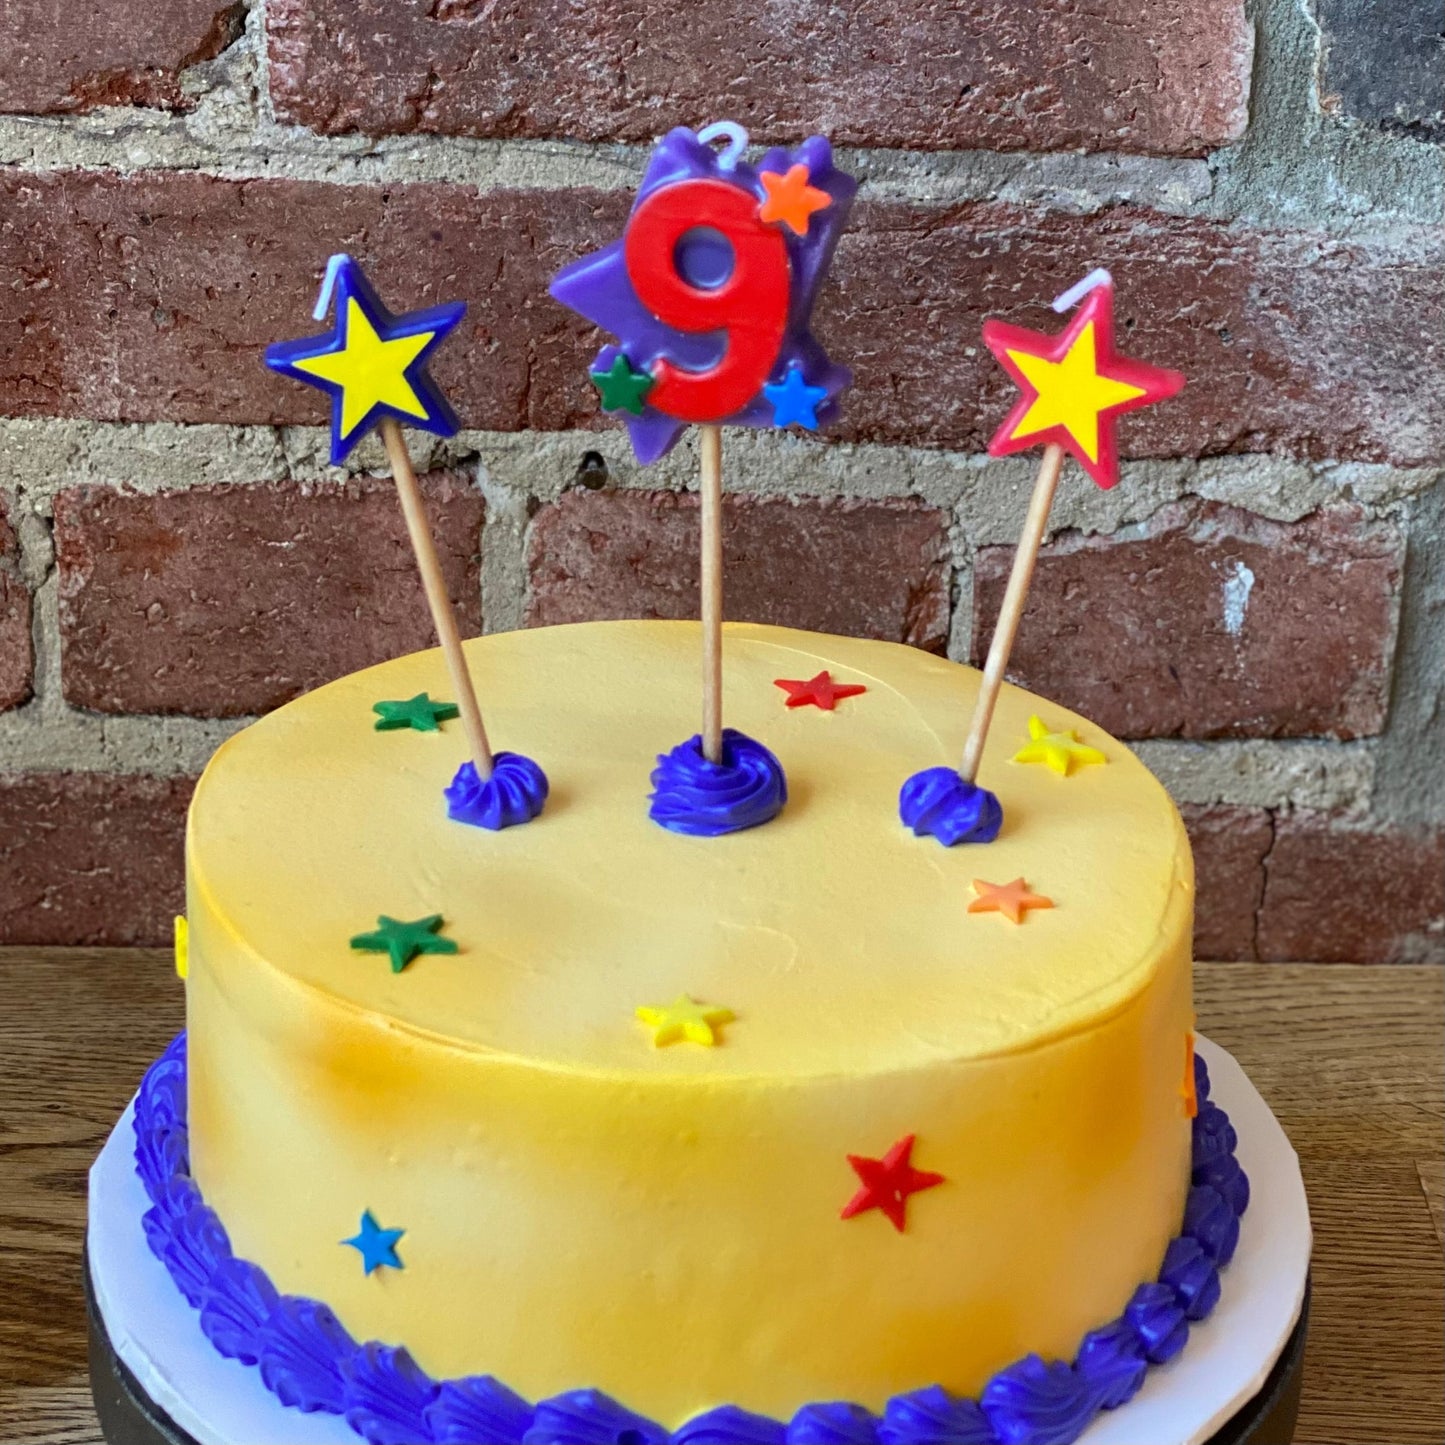 Kids birthday cake with a candle of the number nine